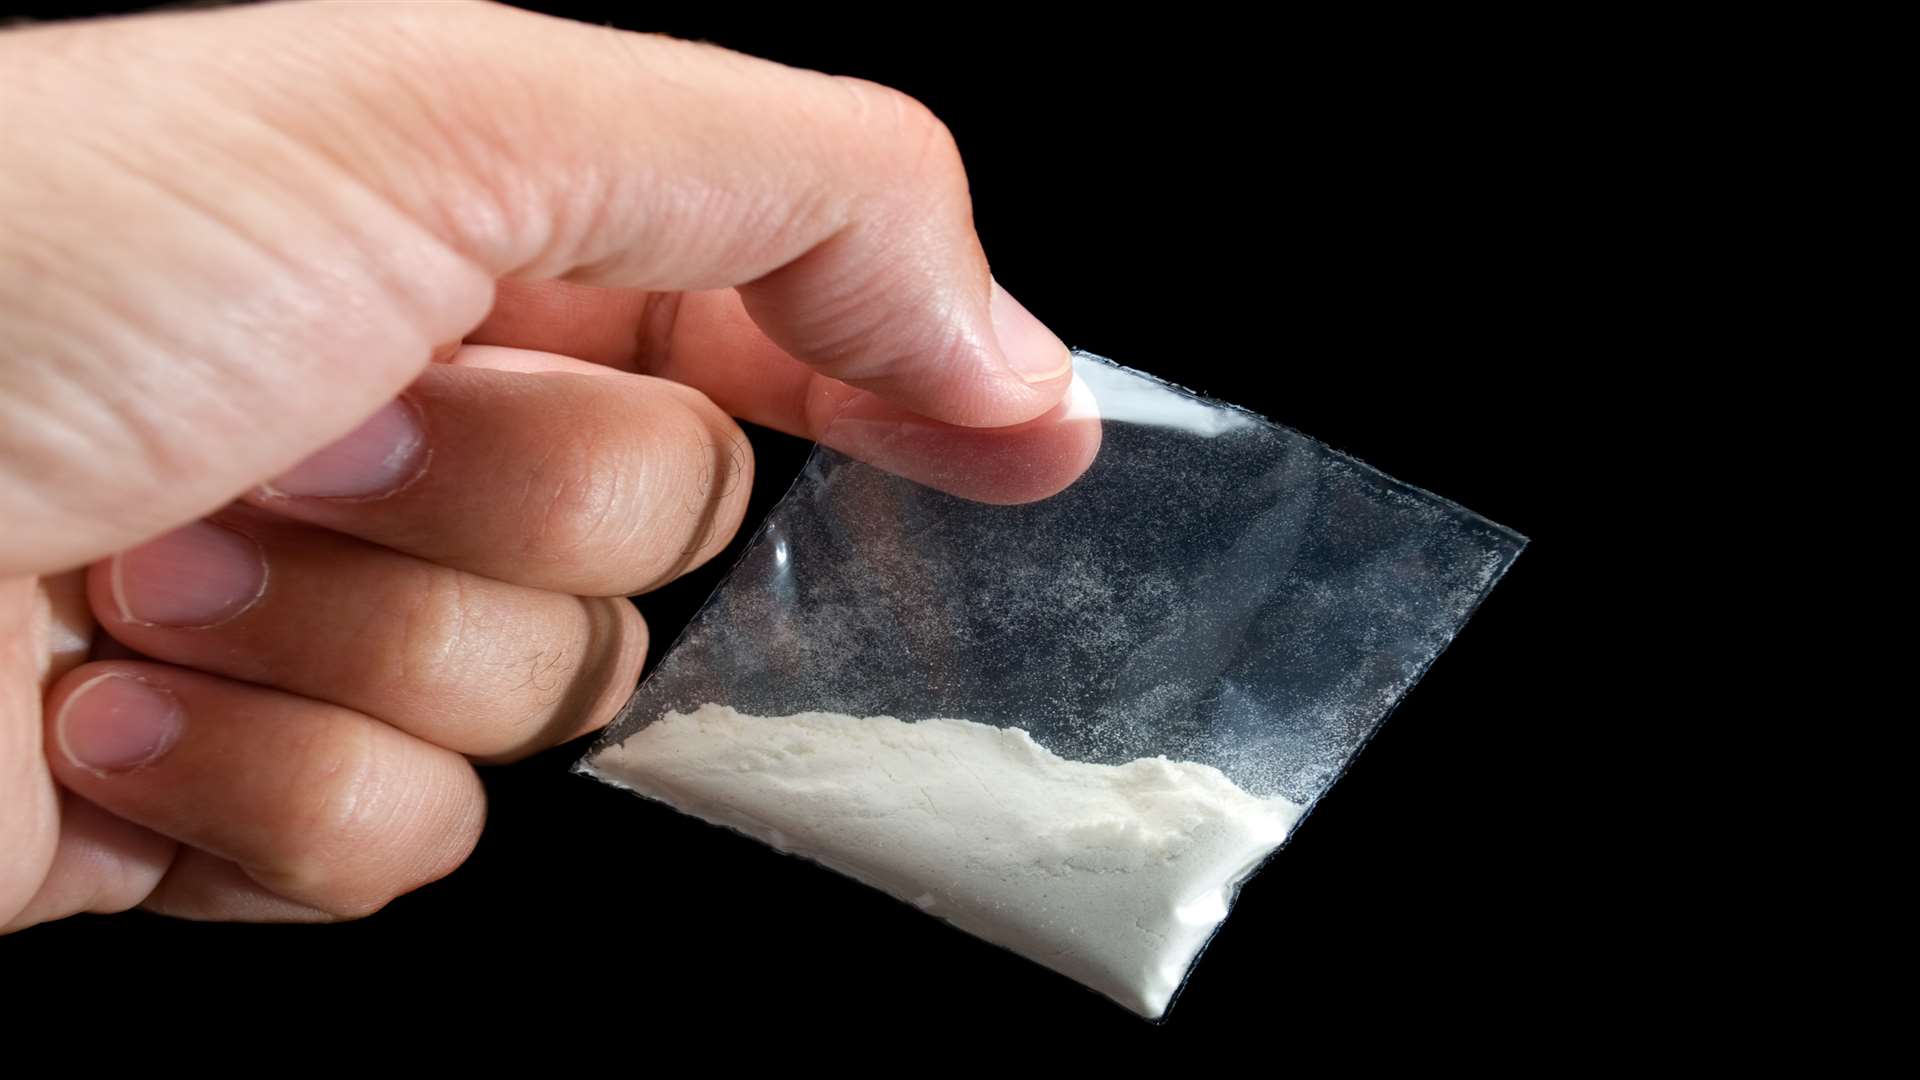 Bag of heroin, stock picture. Thinkstock Image Library